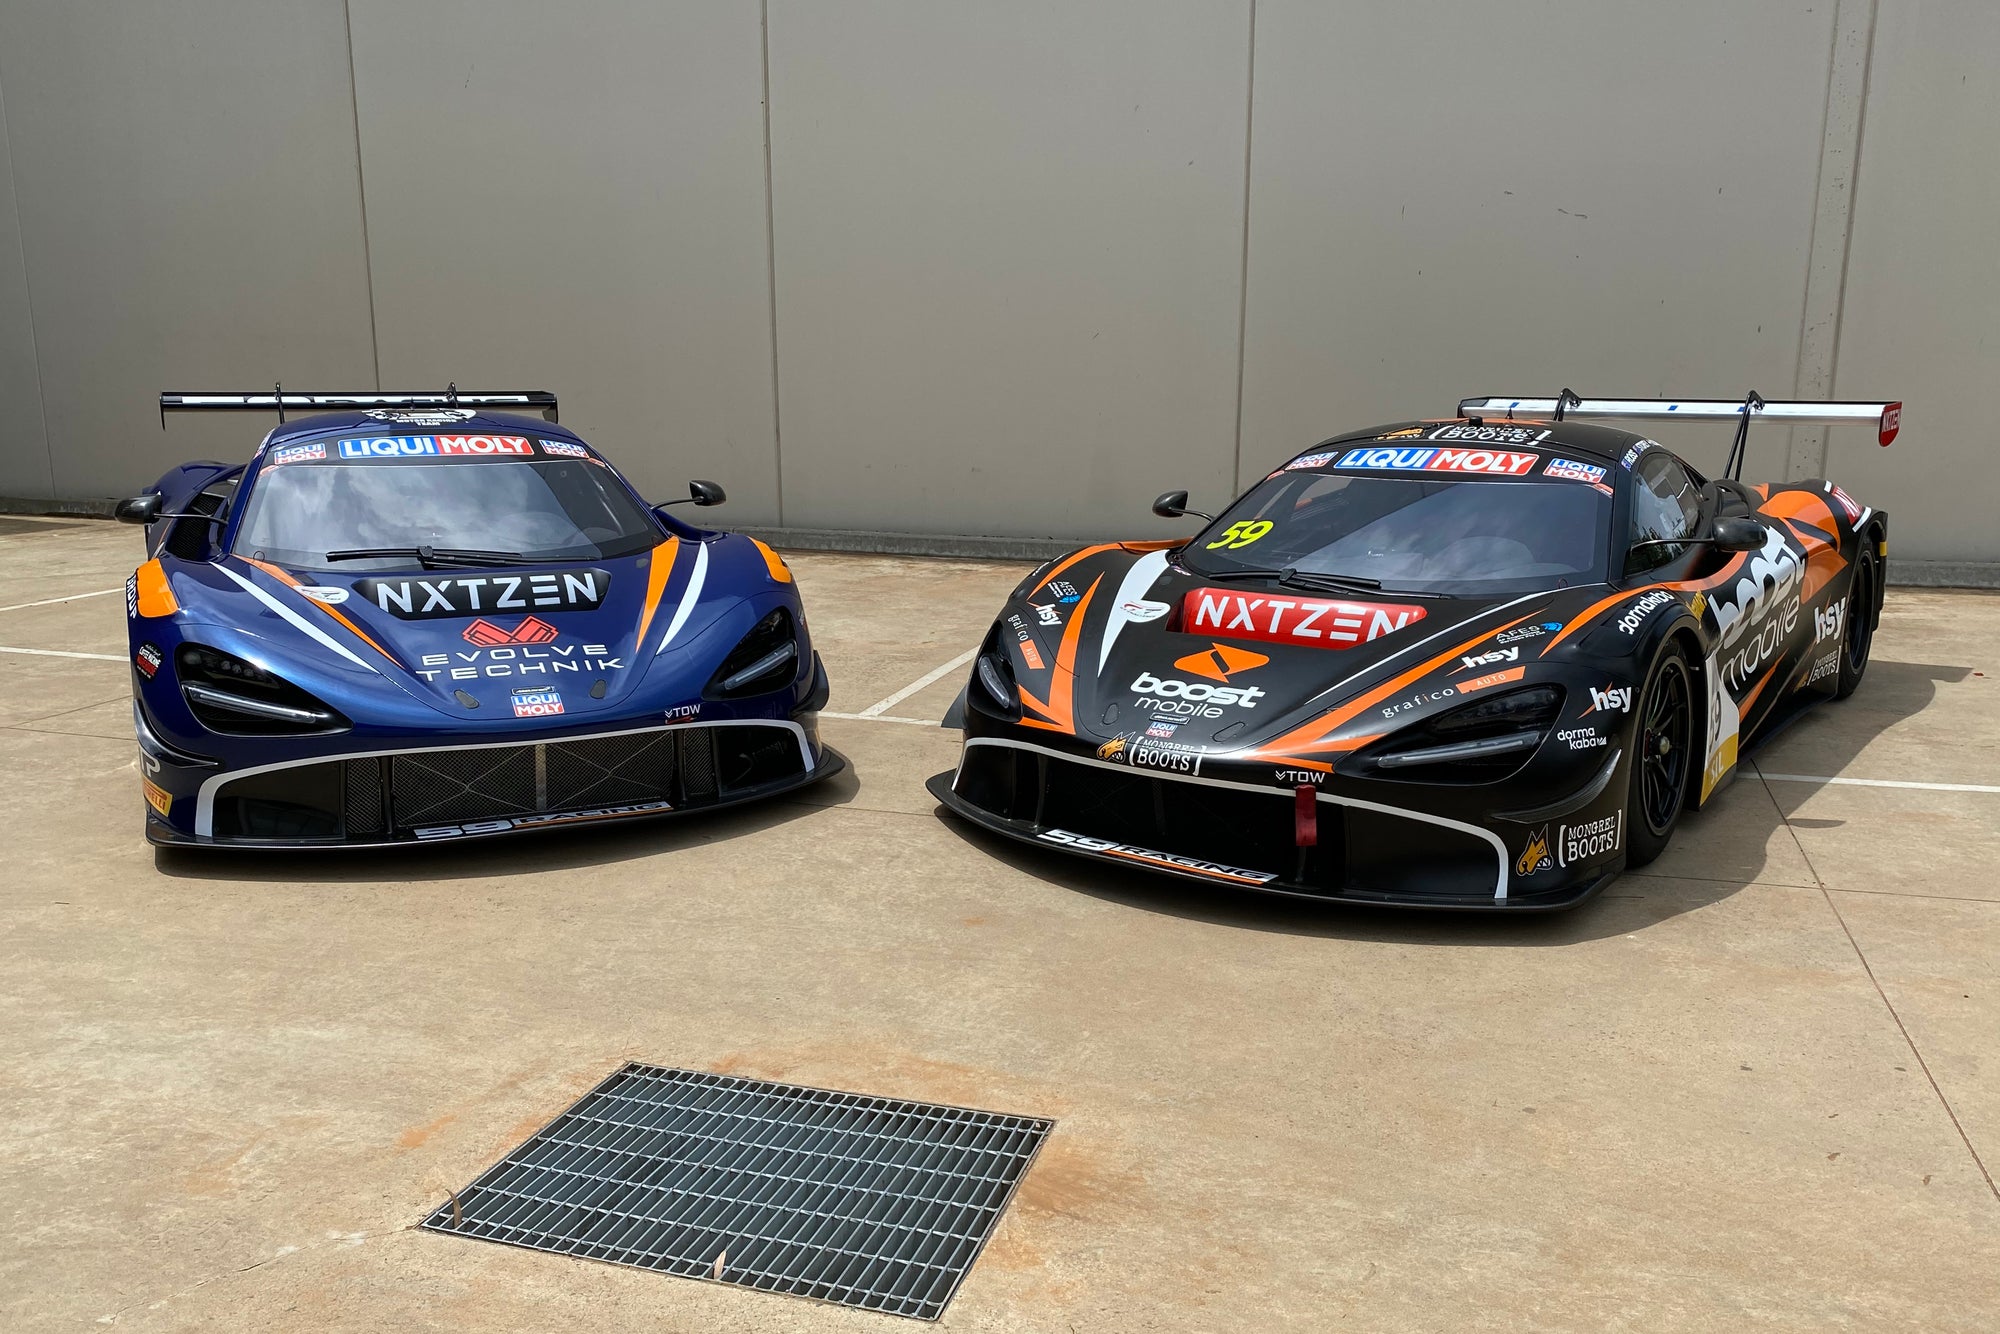 McLaren 720S GT3 Pro entry to challenge for victory at Bathurst 12 Hour